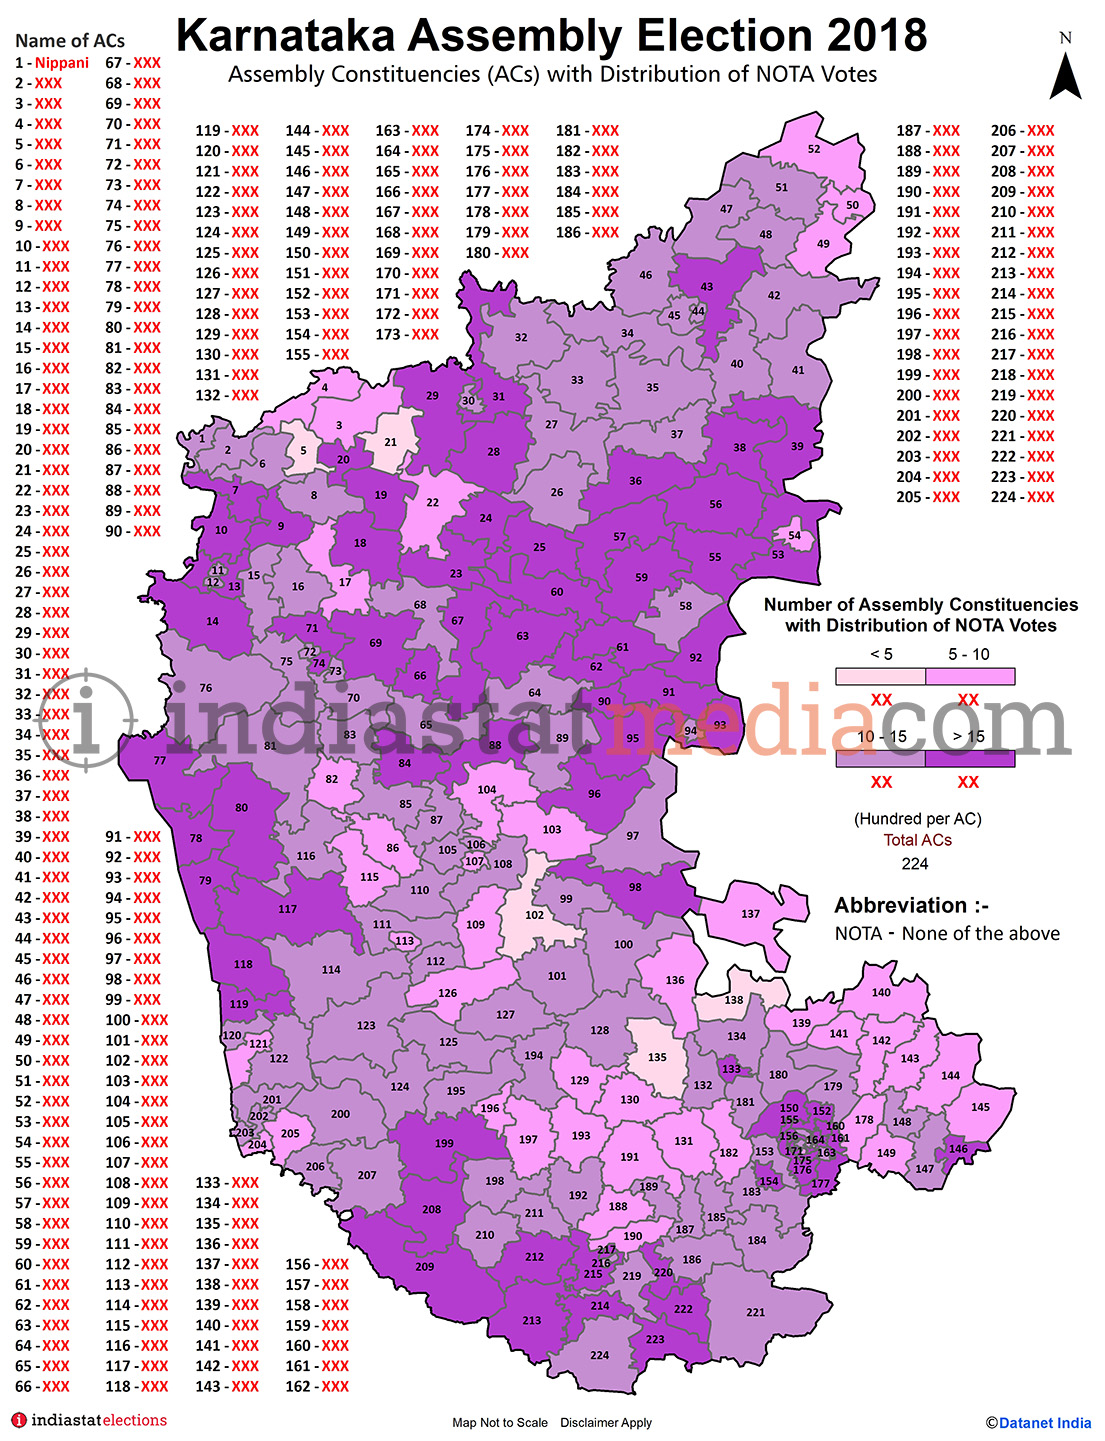 Distribution of NOTA Votes by Constituencies in Karnataka (Assembly Election - 2018)